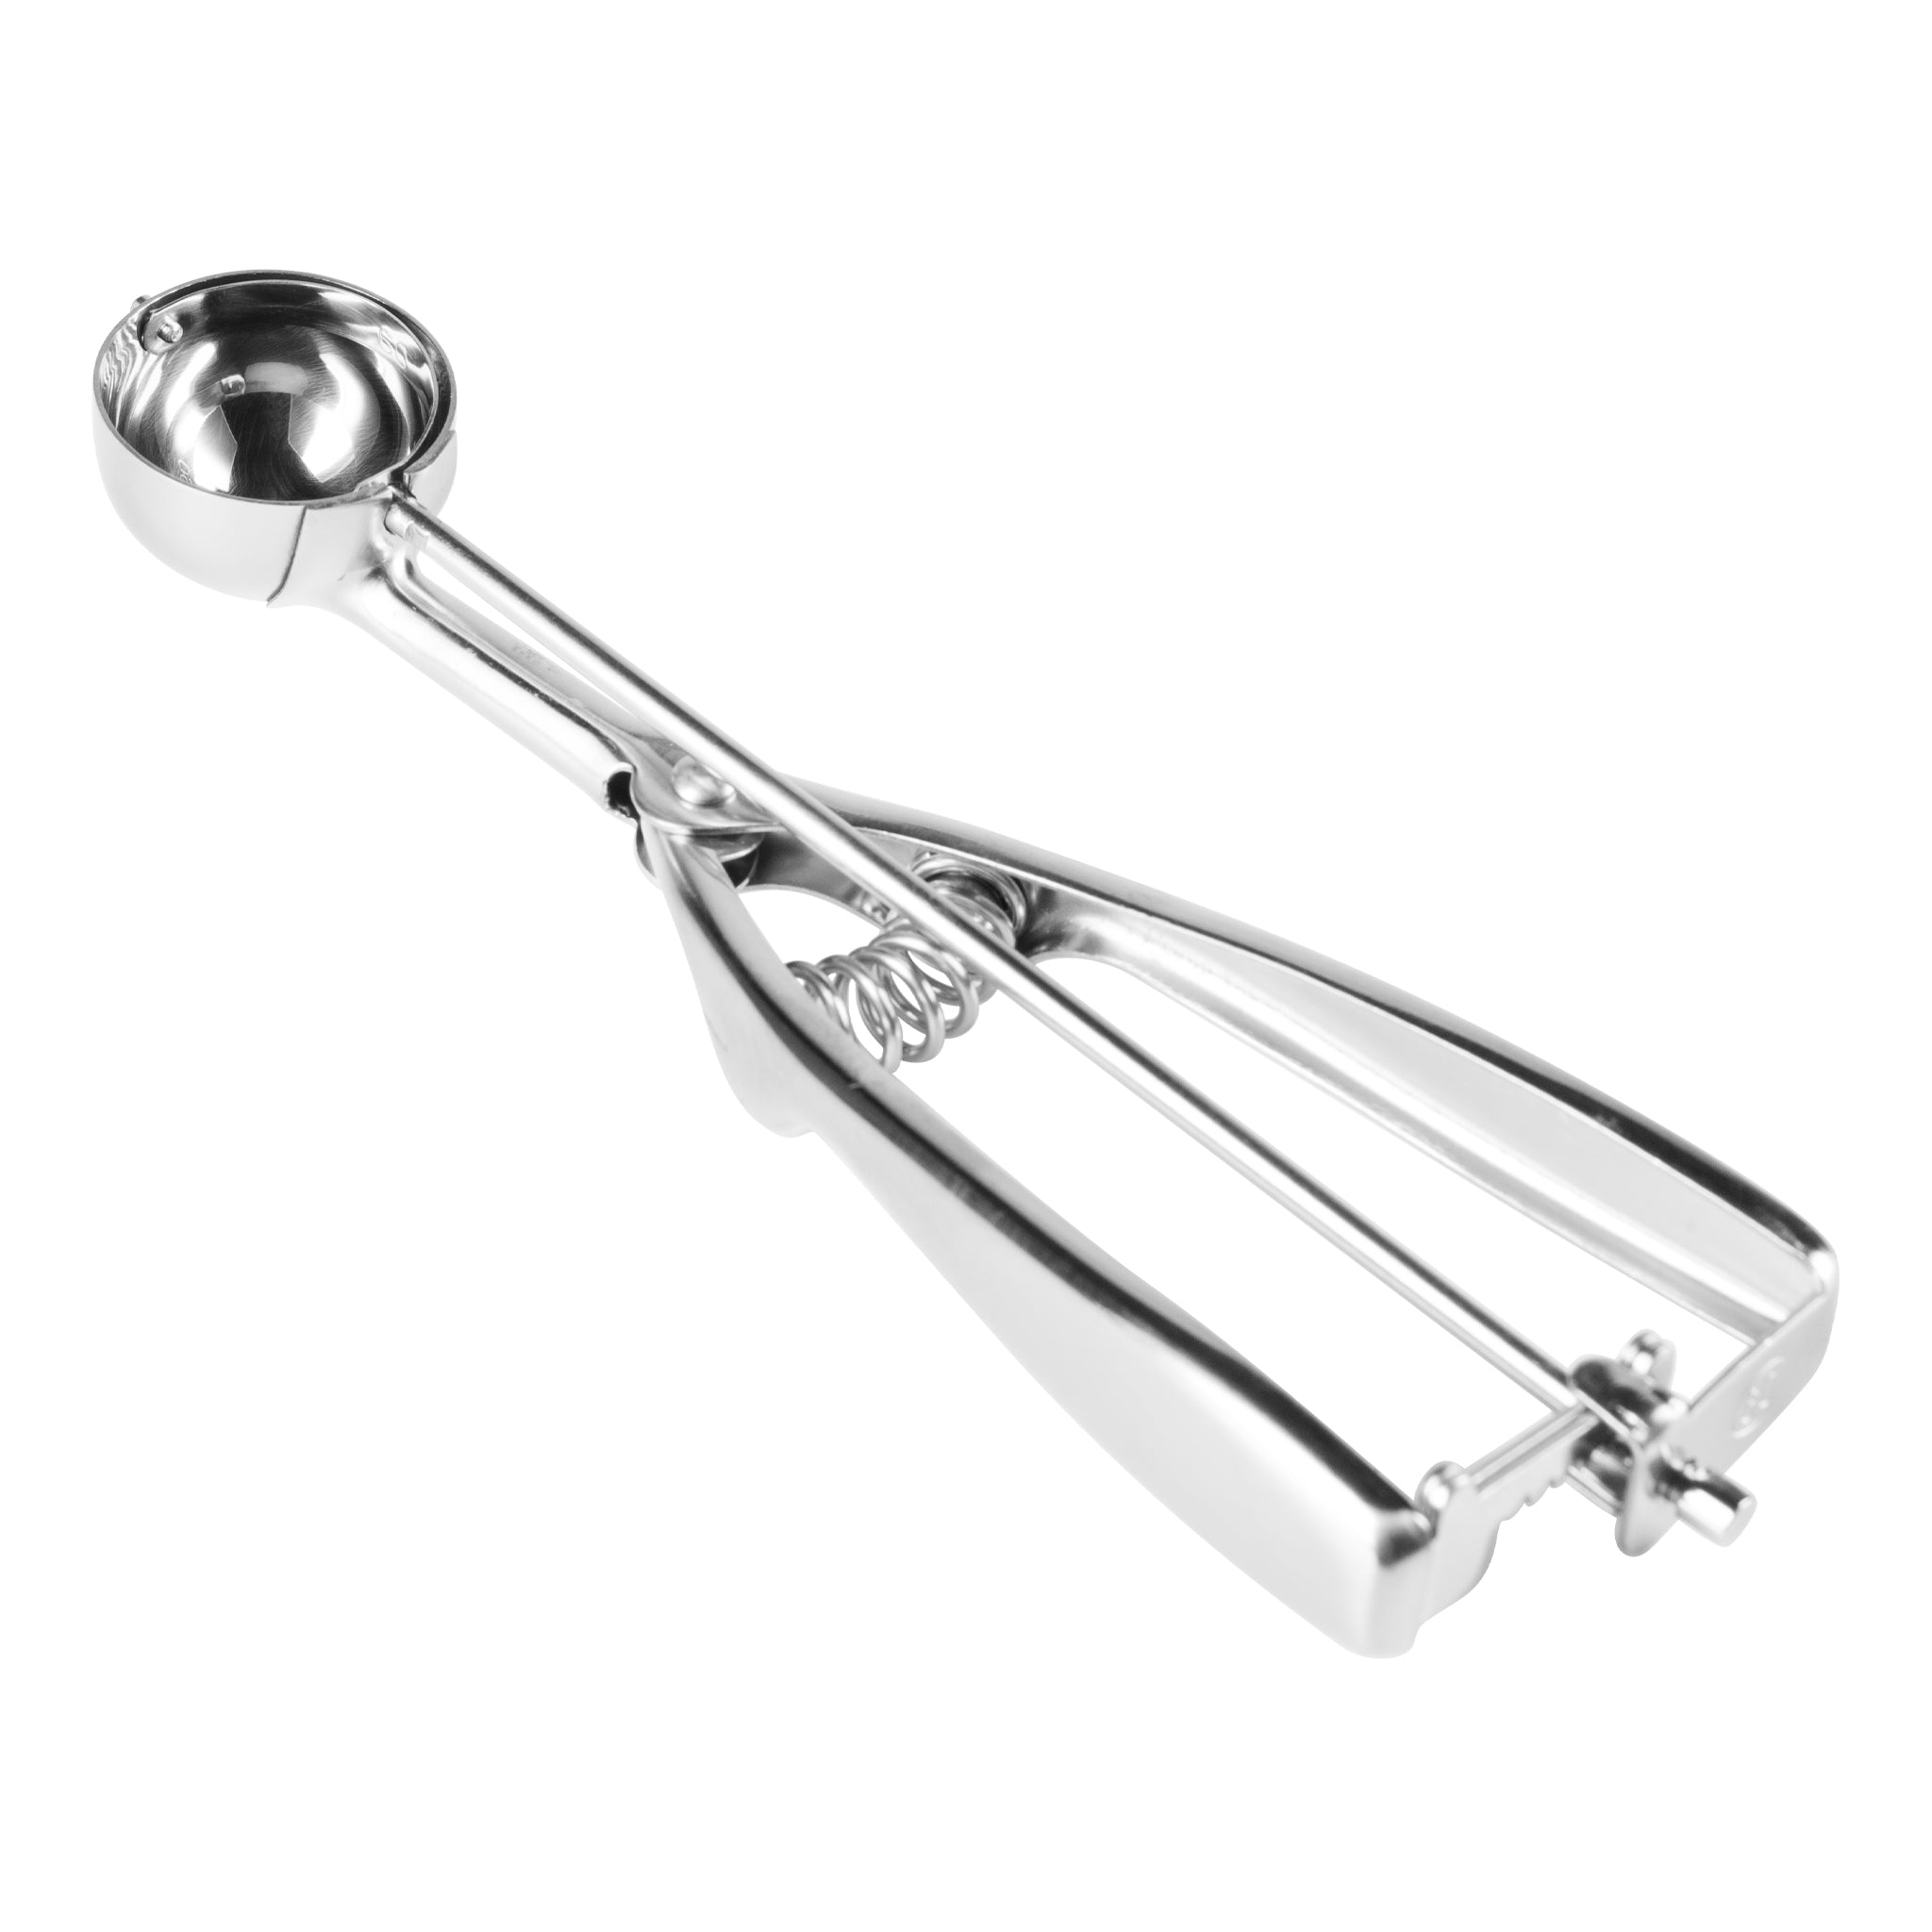 Comfy Grip 1.75 oz Stainless Steel #24 Portion Scoop - with Red